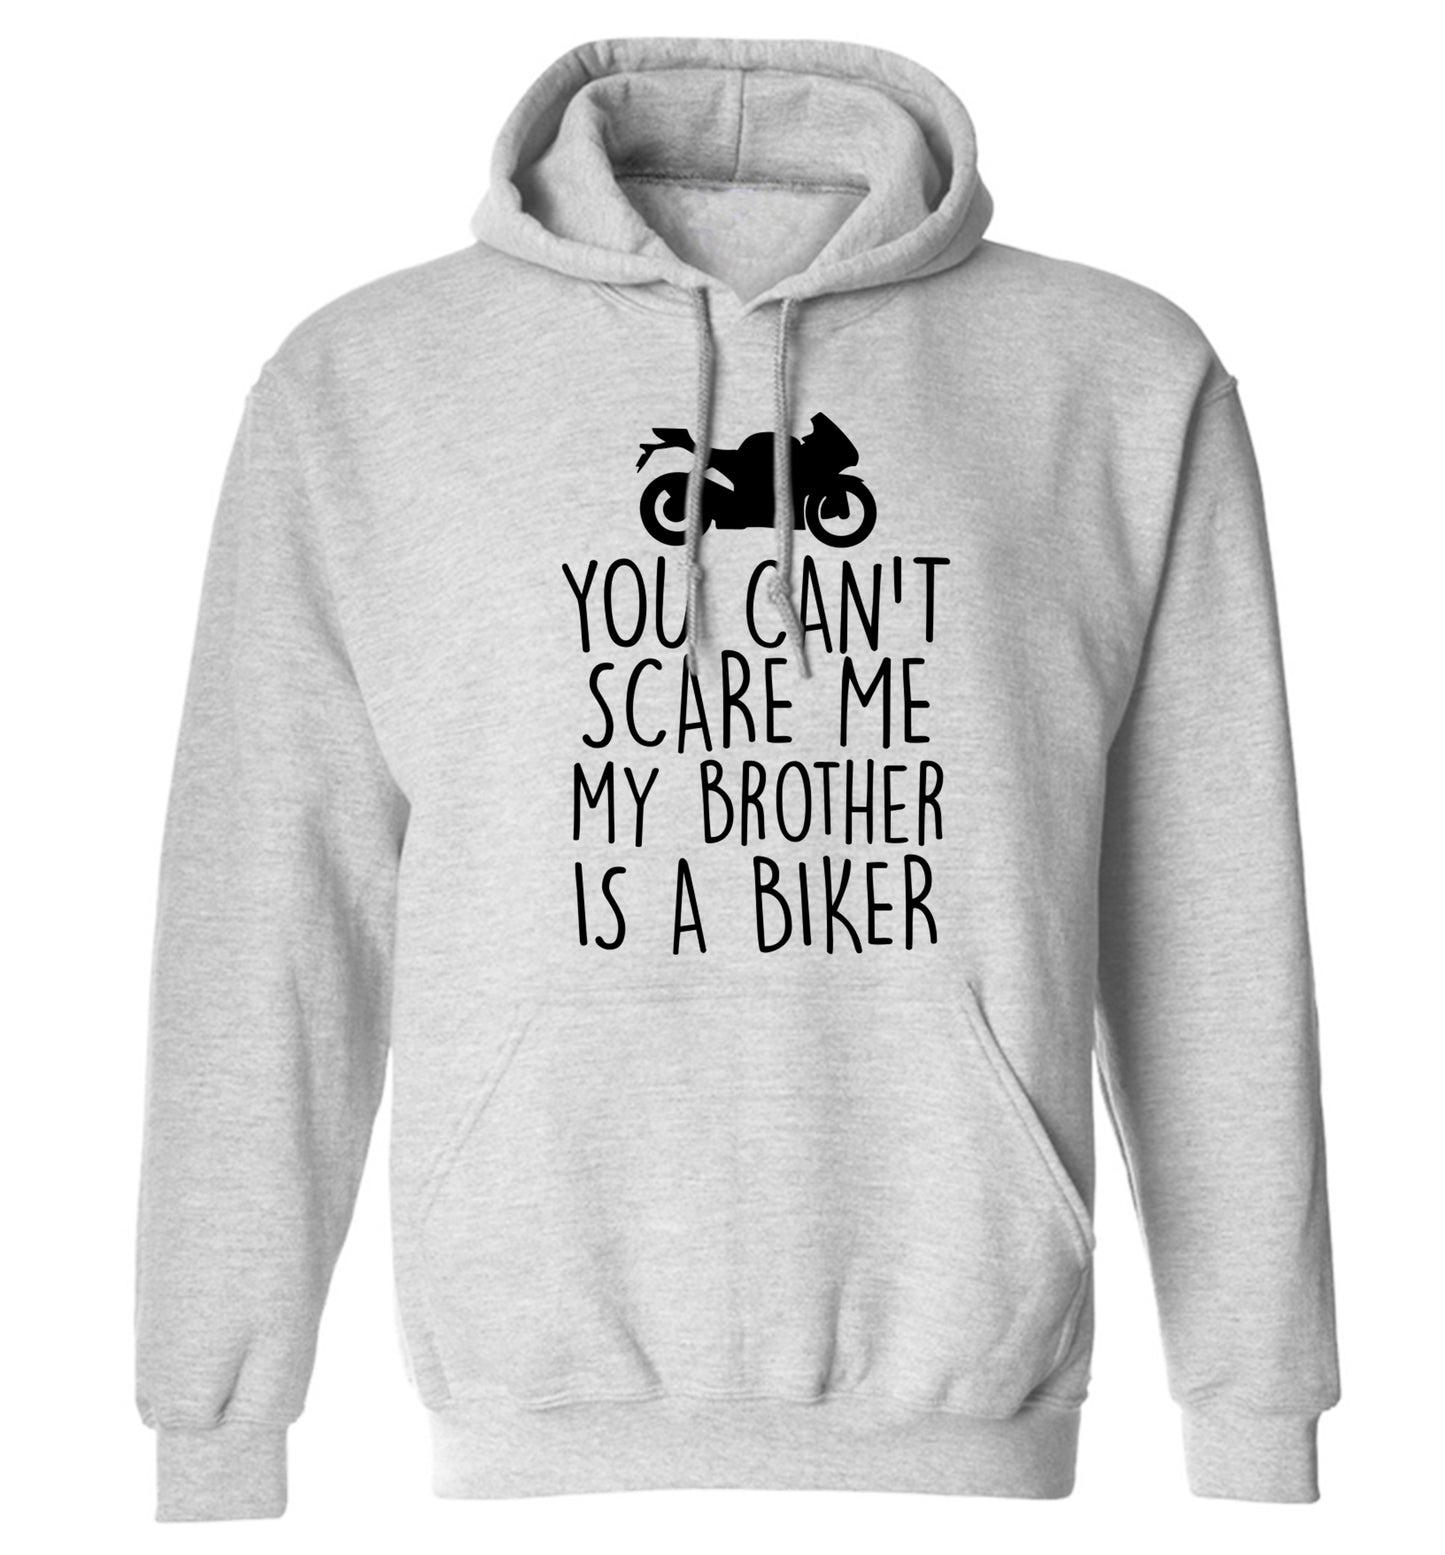 You can't scare me my brother is a biker adults unisex grey hoodie 2XL